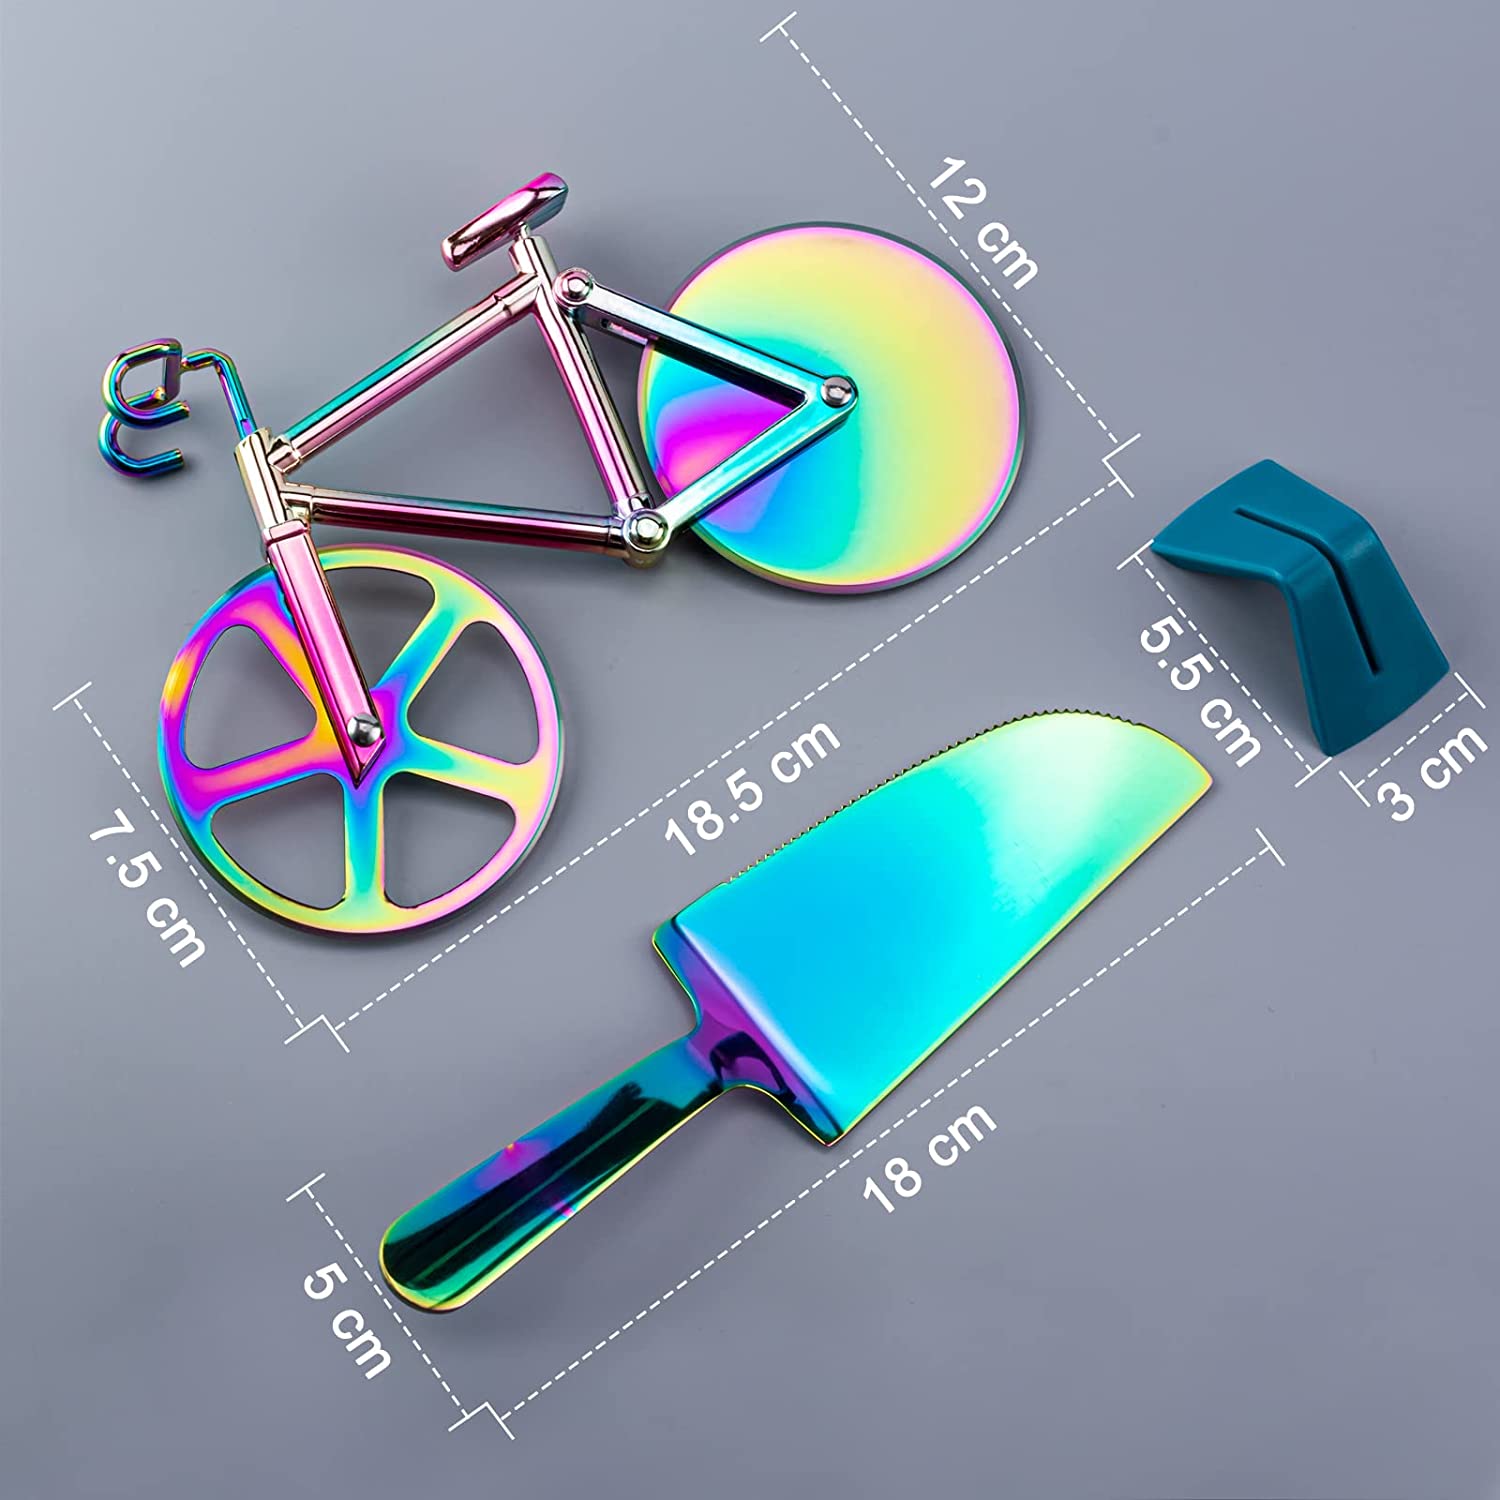 Multi-Colored Bike Pizza Cutter with Stand and Shovel